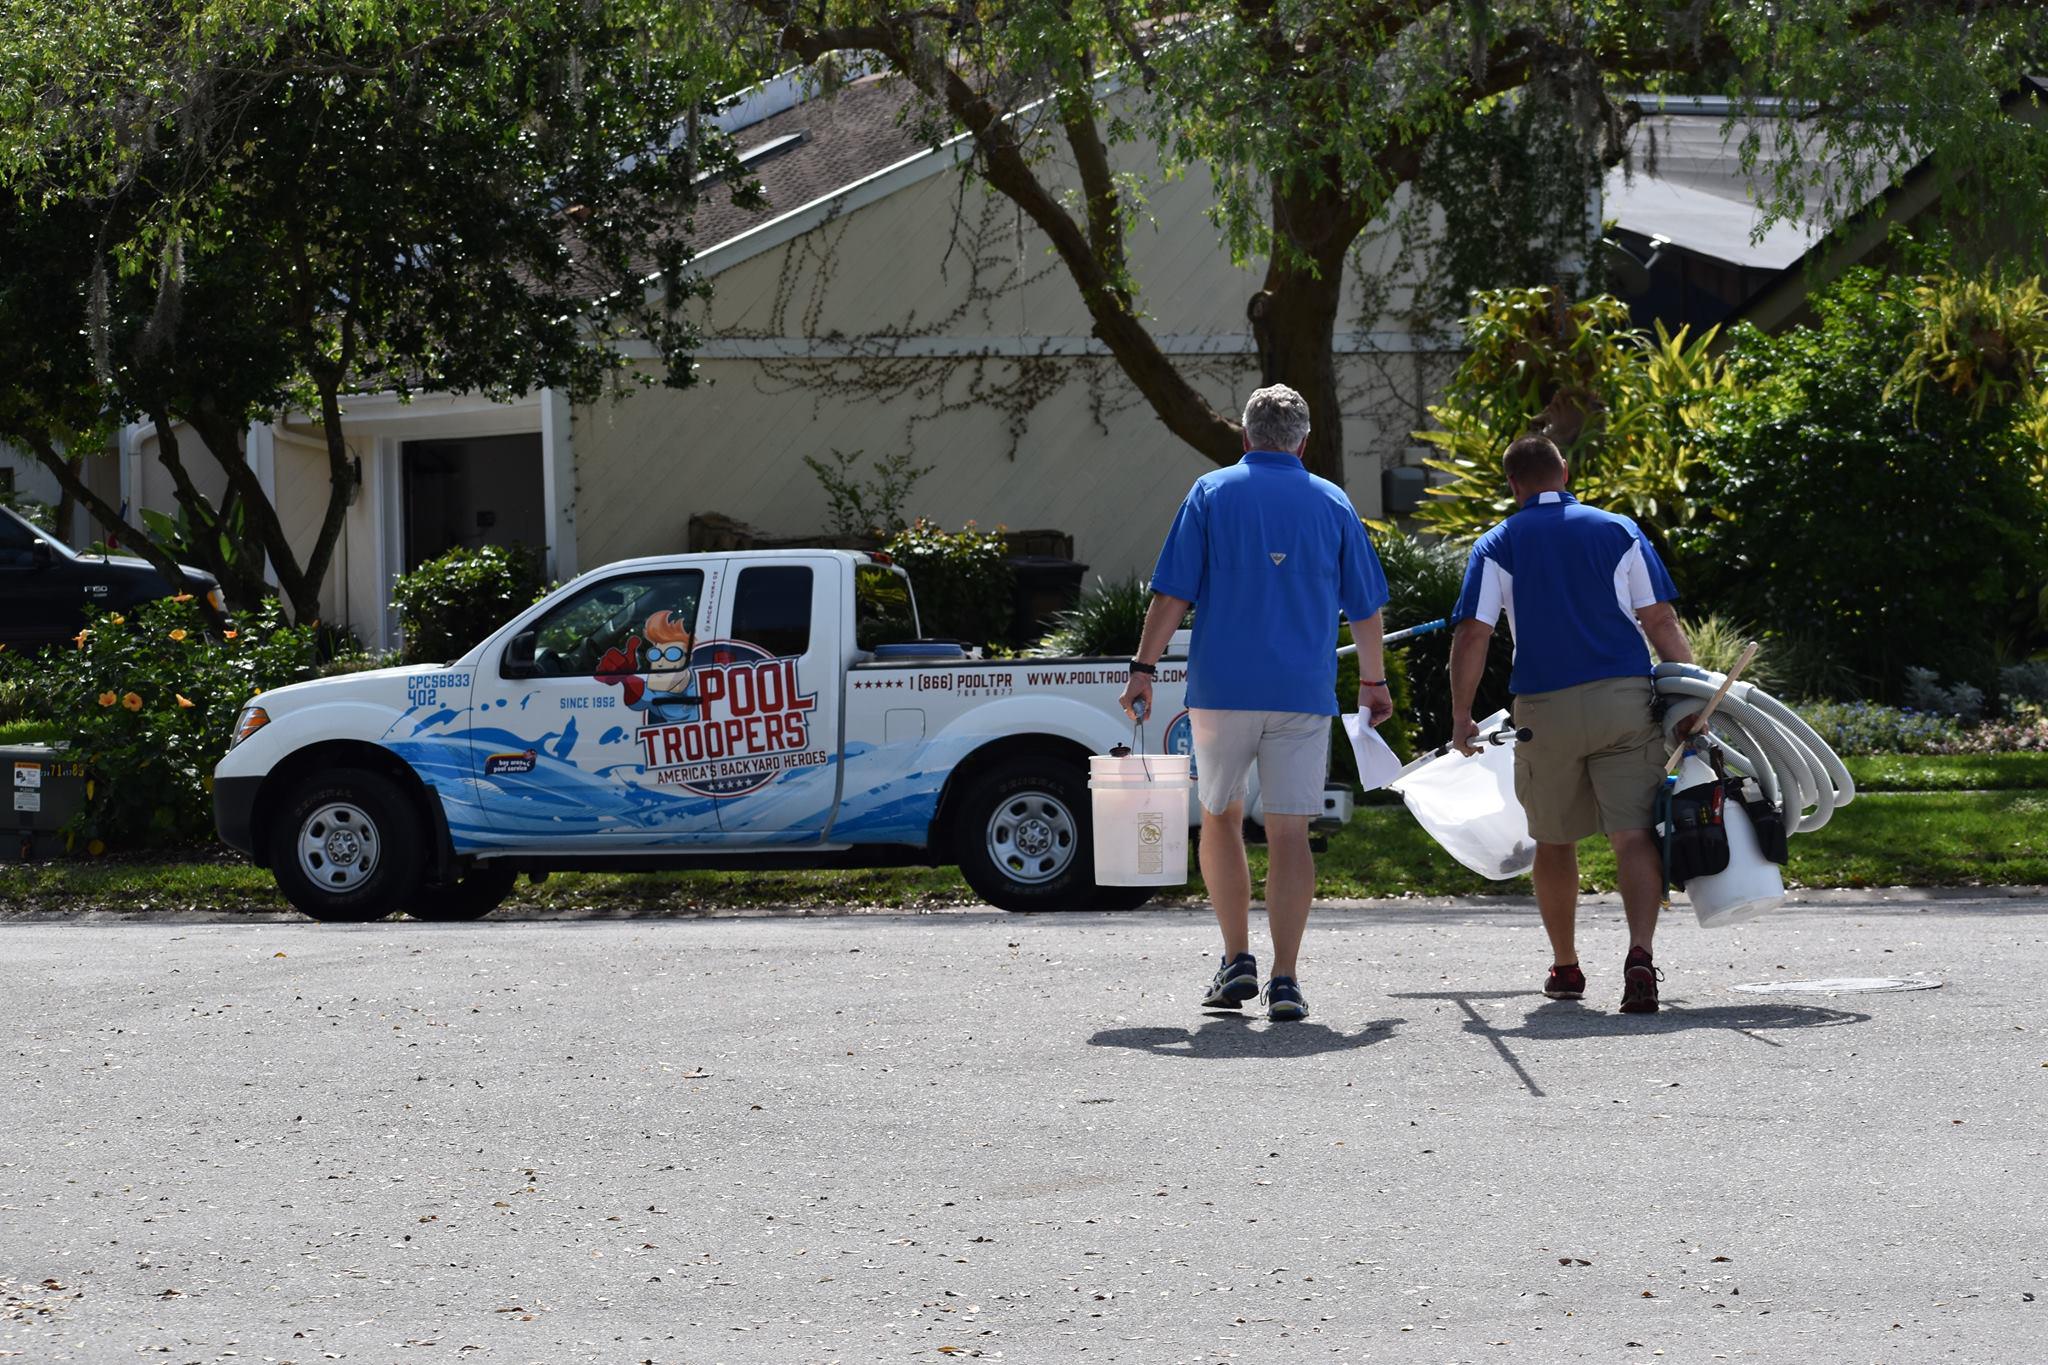 Pool Troopers Technicians by Service Truck Pool Troopers Cypress (281)358-1876